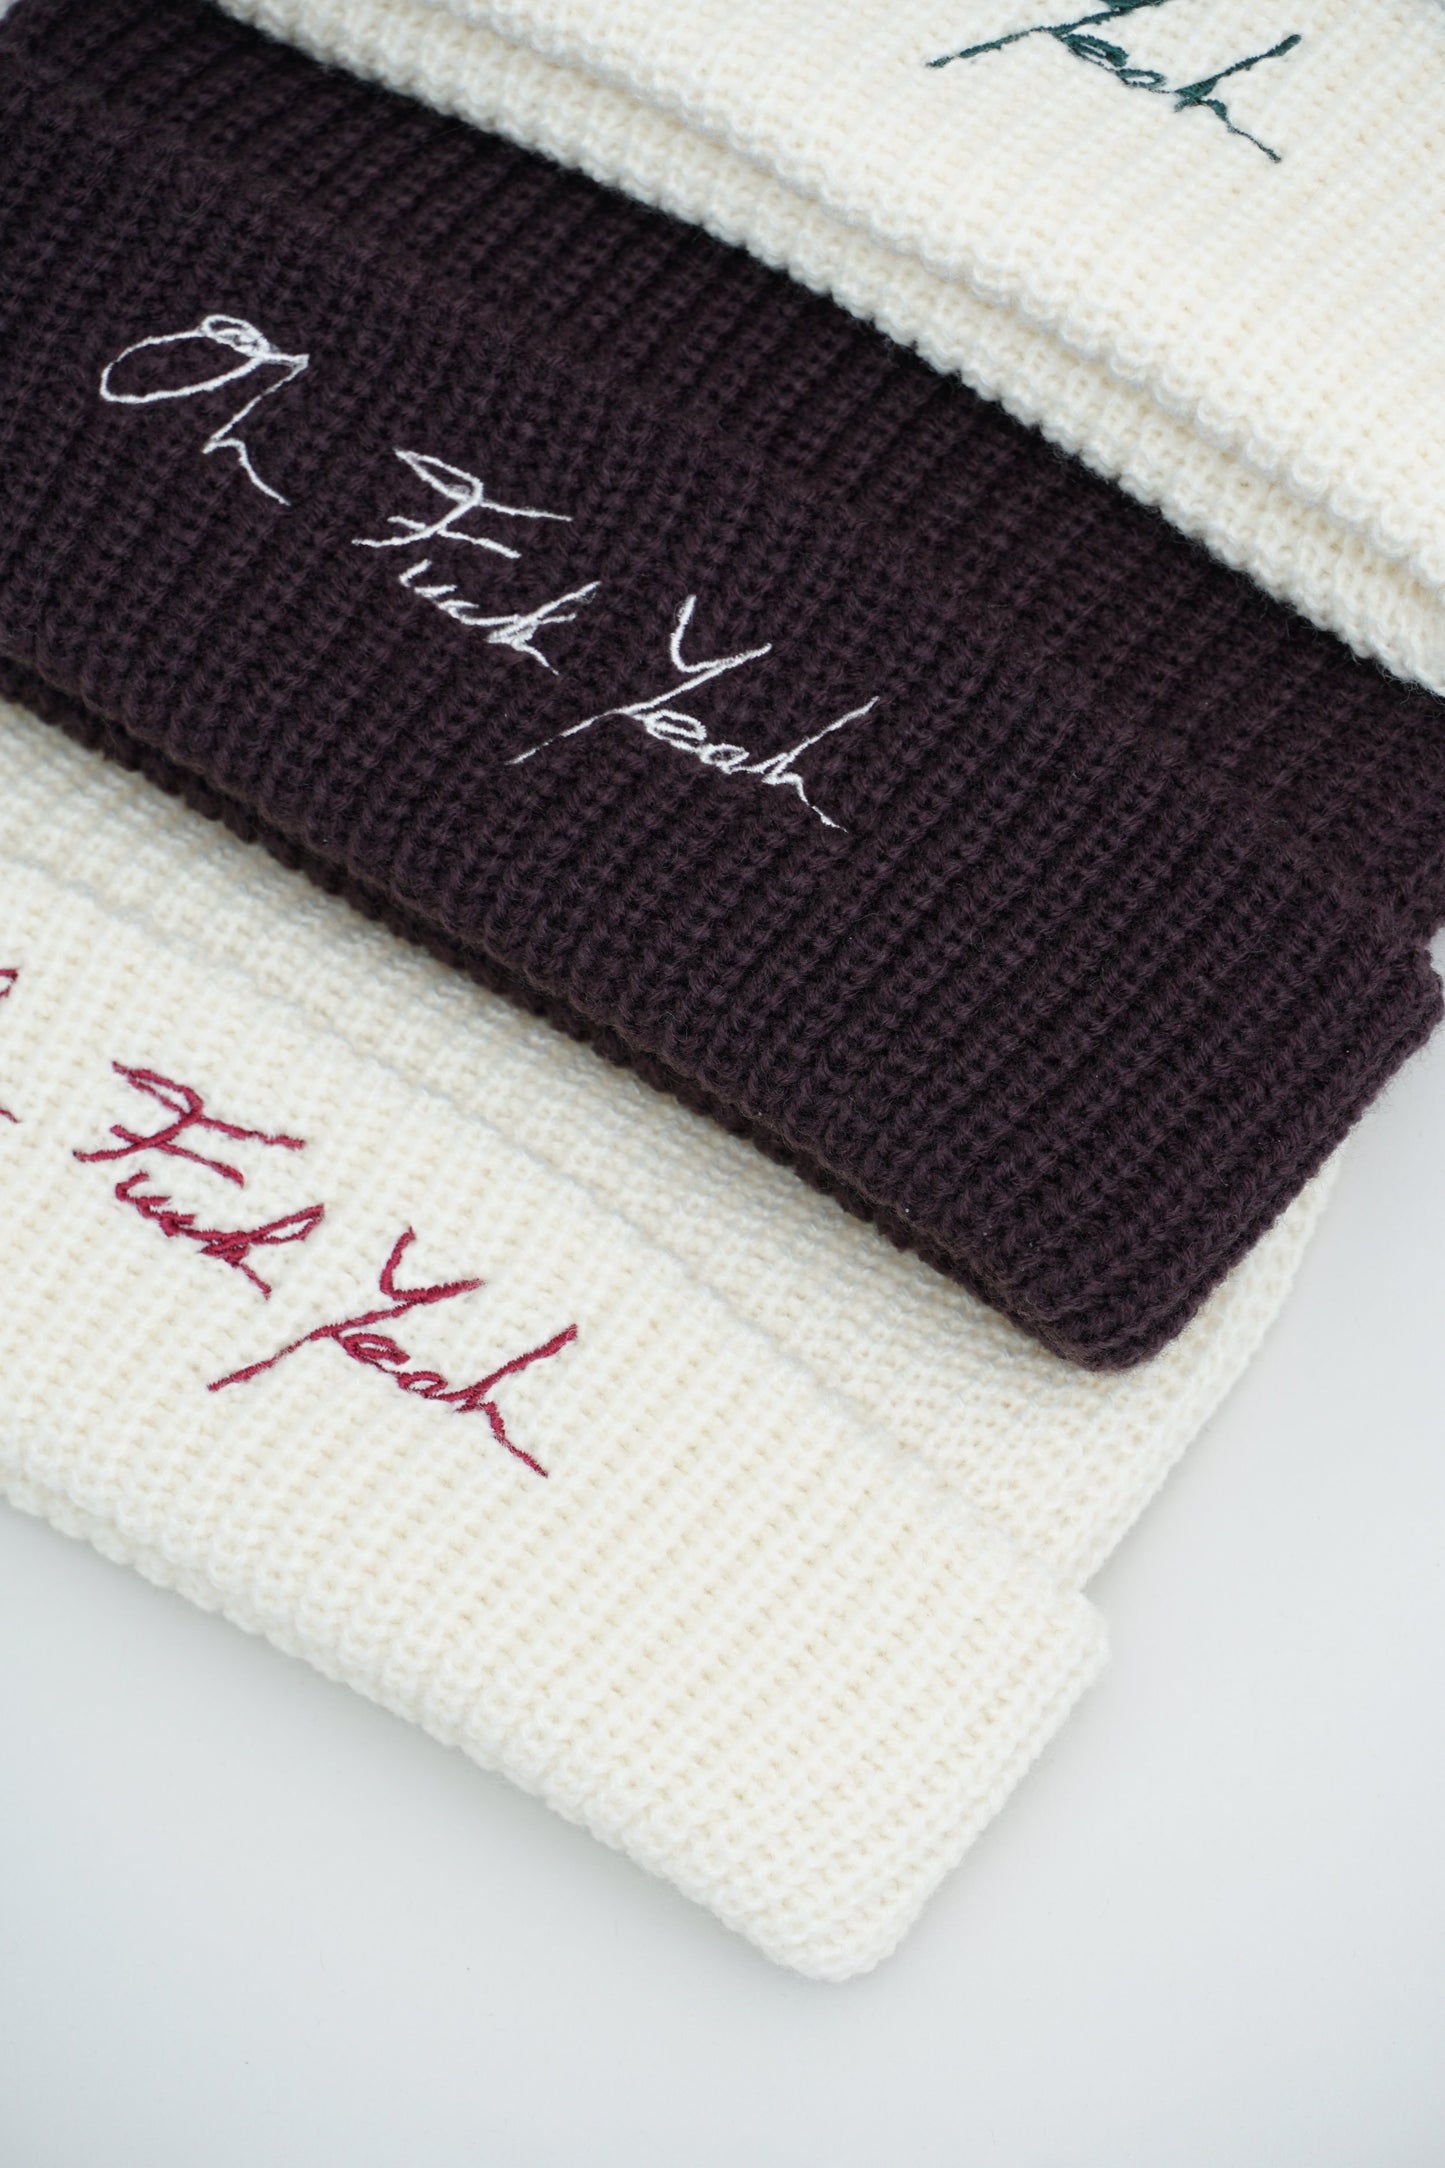 Signature Cable Beanie - Ivory/Red